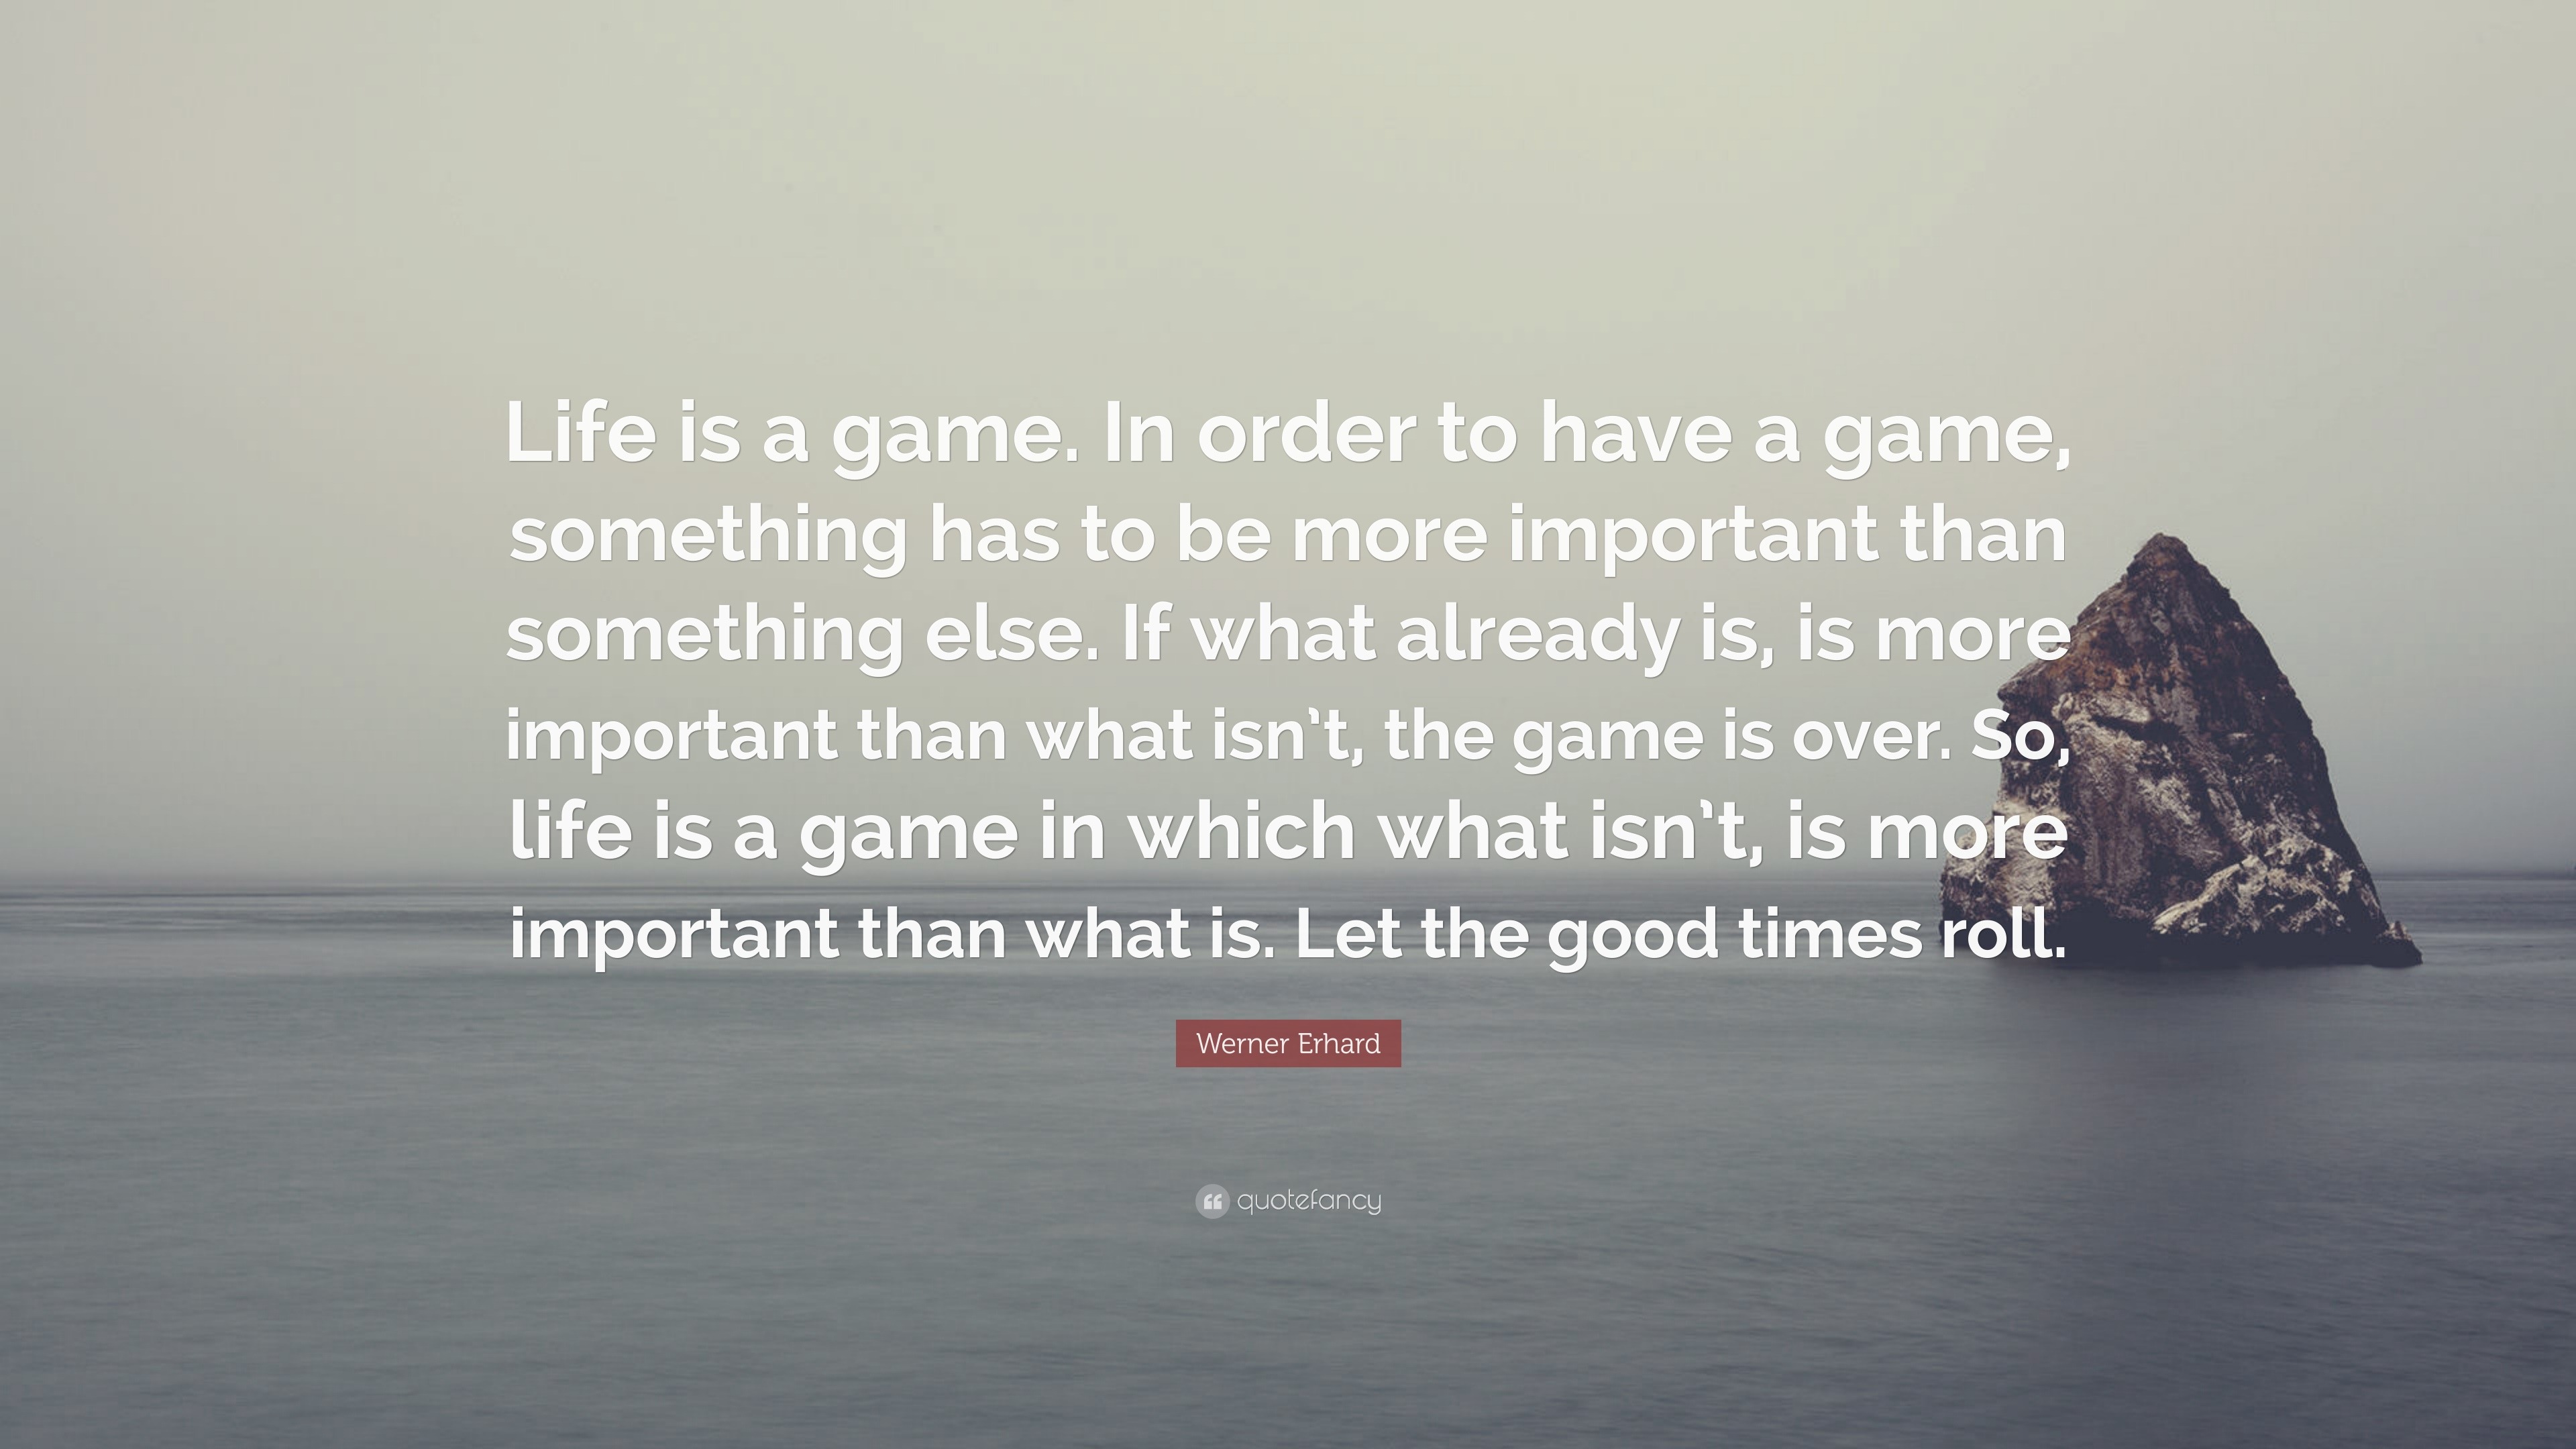 Werner Erhard Quote Life Is A Game In Order To Have A Game Something Has To Be More Important Than Something Else If What Already Is Is